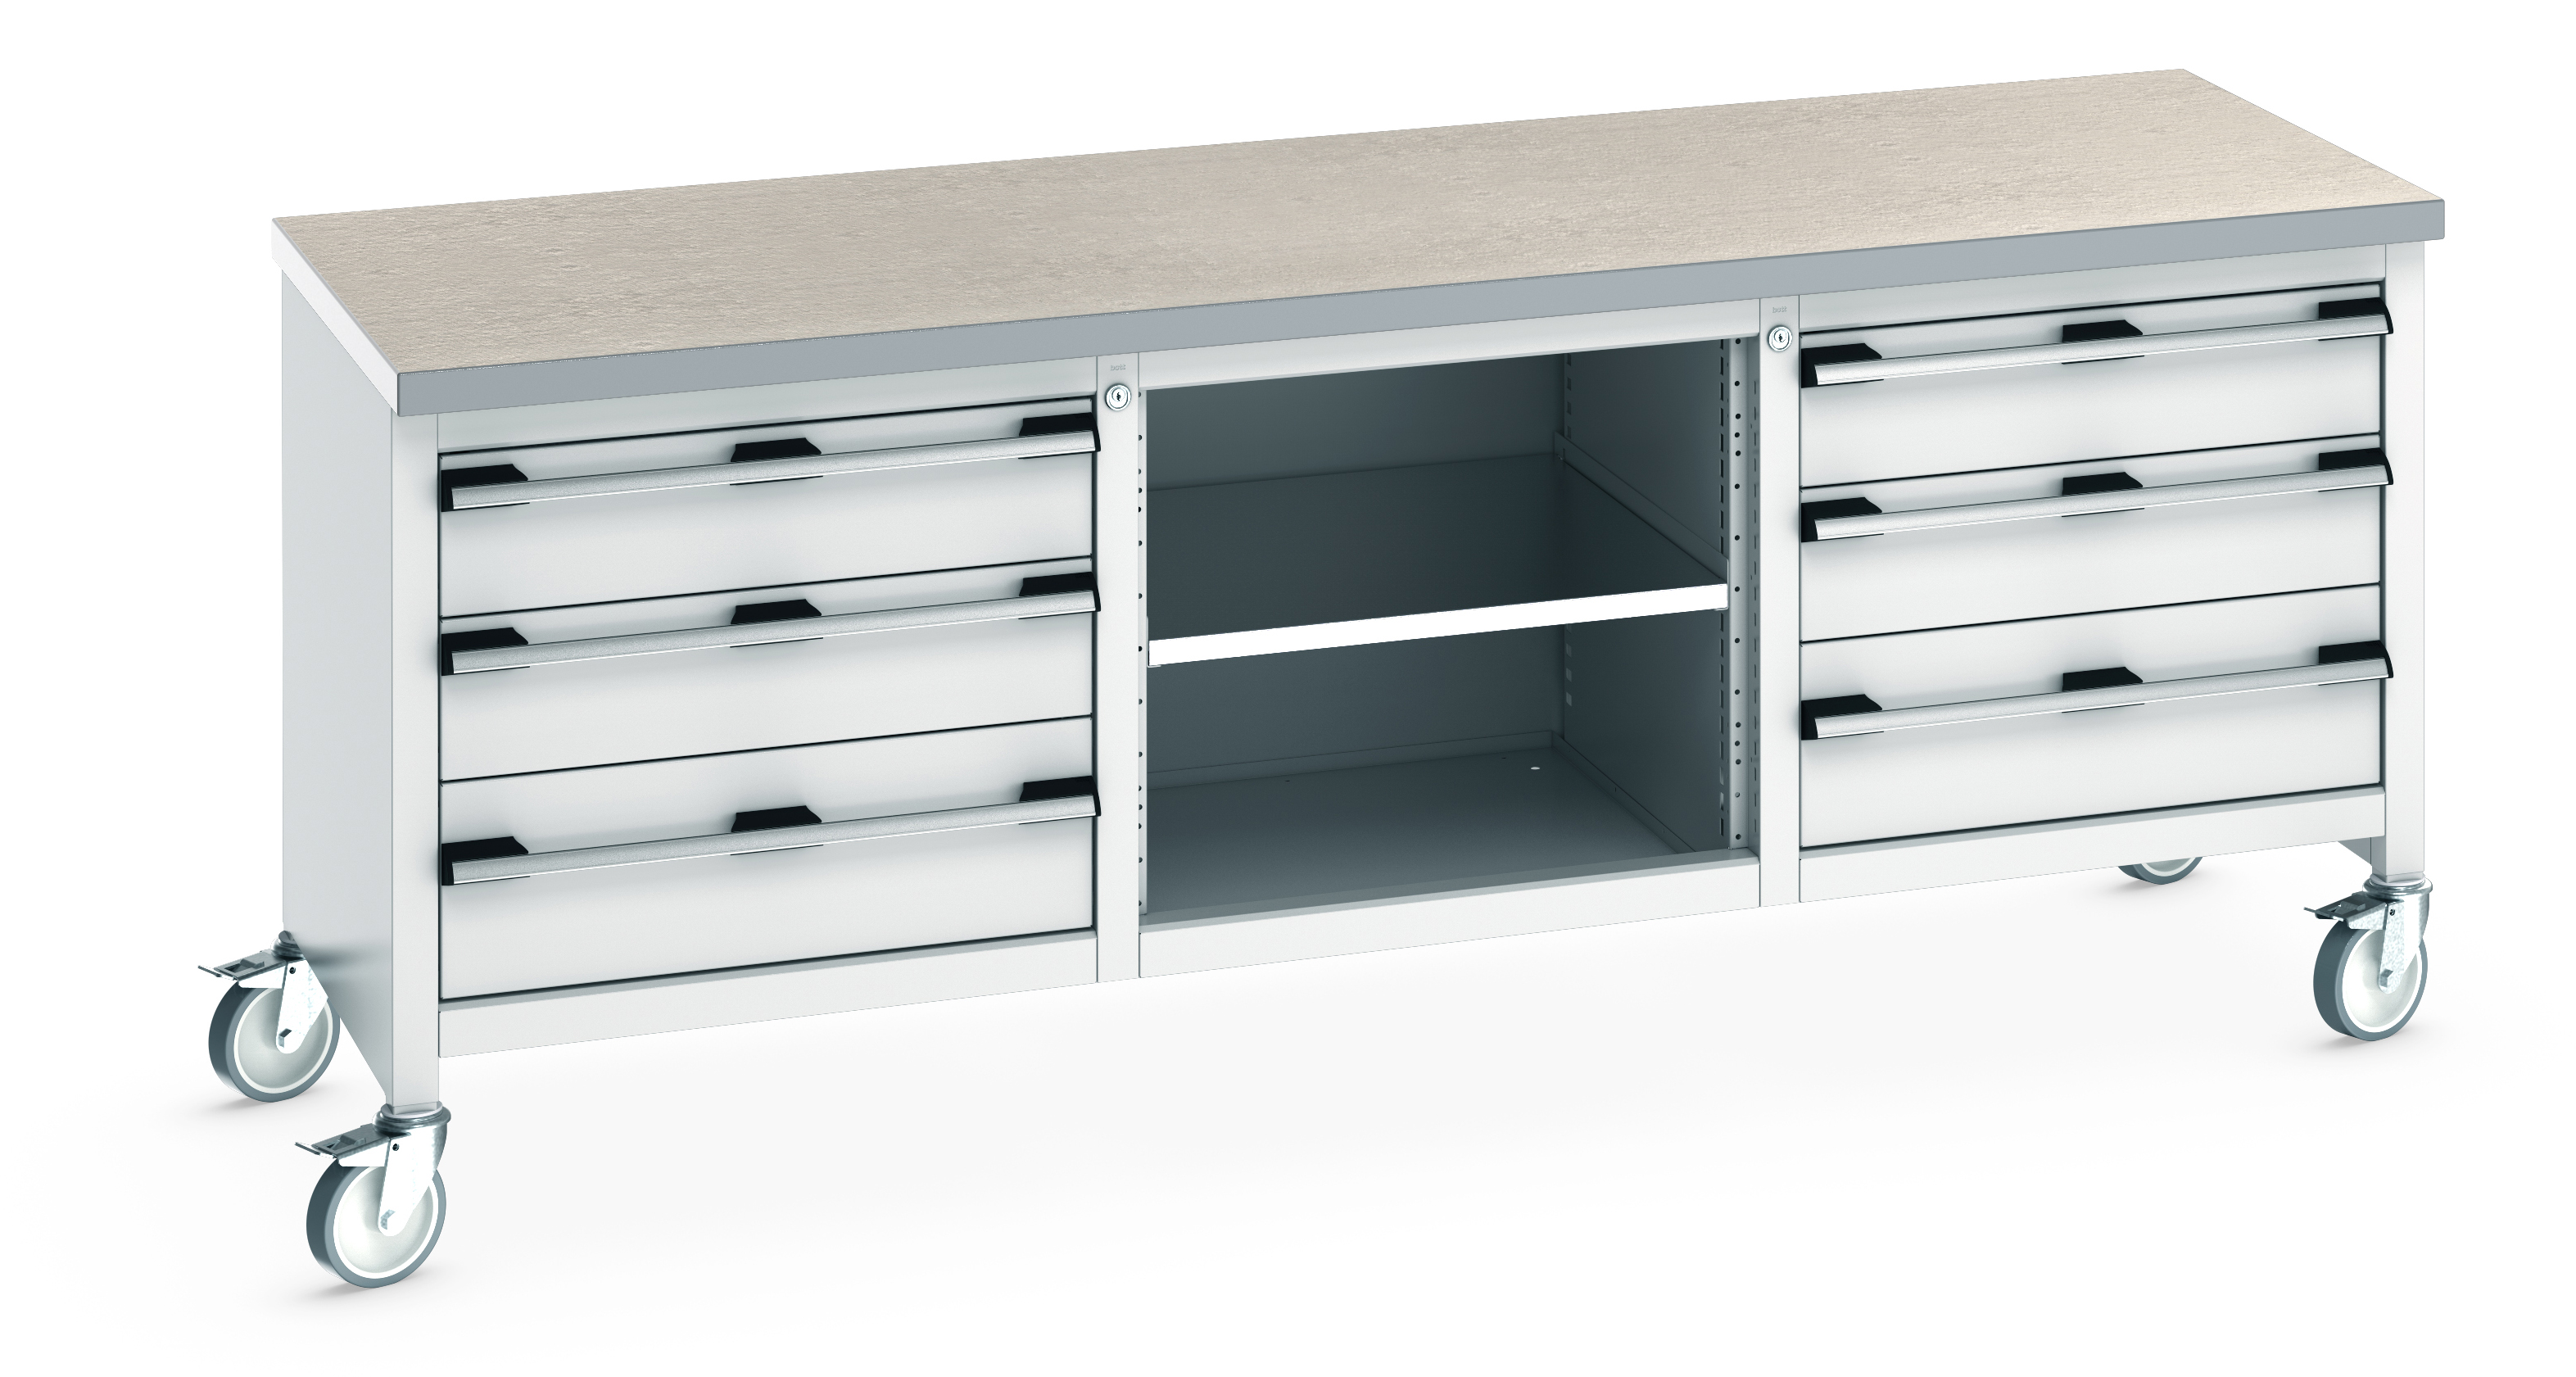 Bott Cubio Mobile Storage Bench With 3 Drawer Cabinet / Open Cupboard / 3 Drawer Cabinet - 41002132.16V